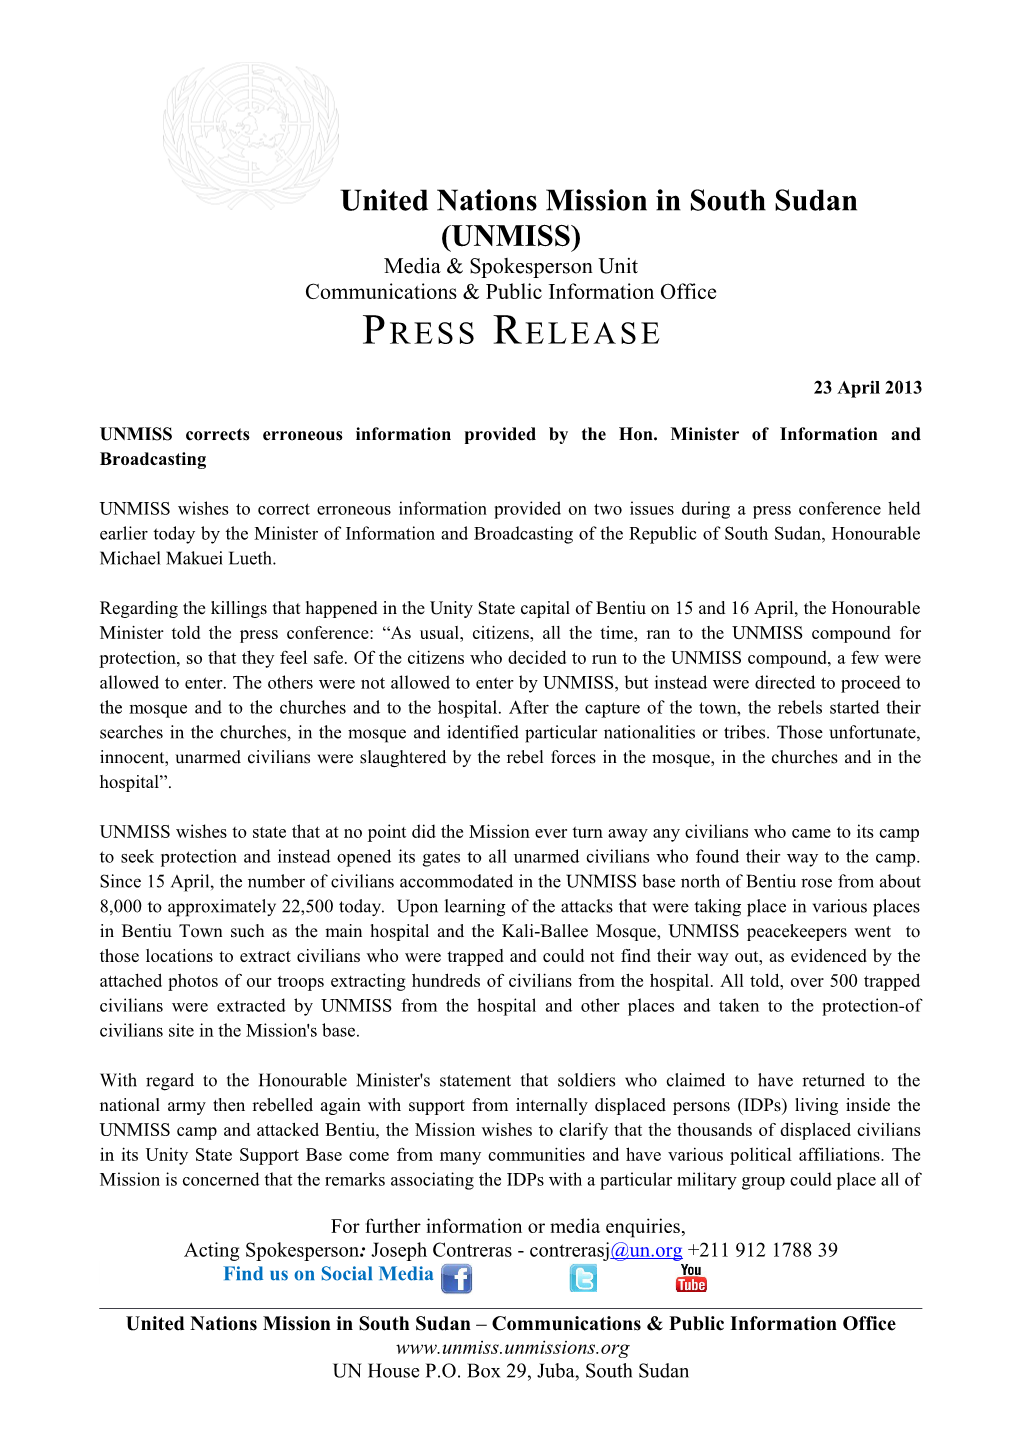 UNMISS Corrects Erroneous Information Provided by the Hon. Minister of Information And